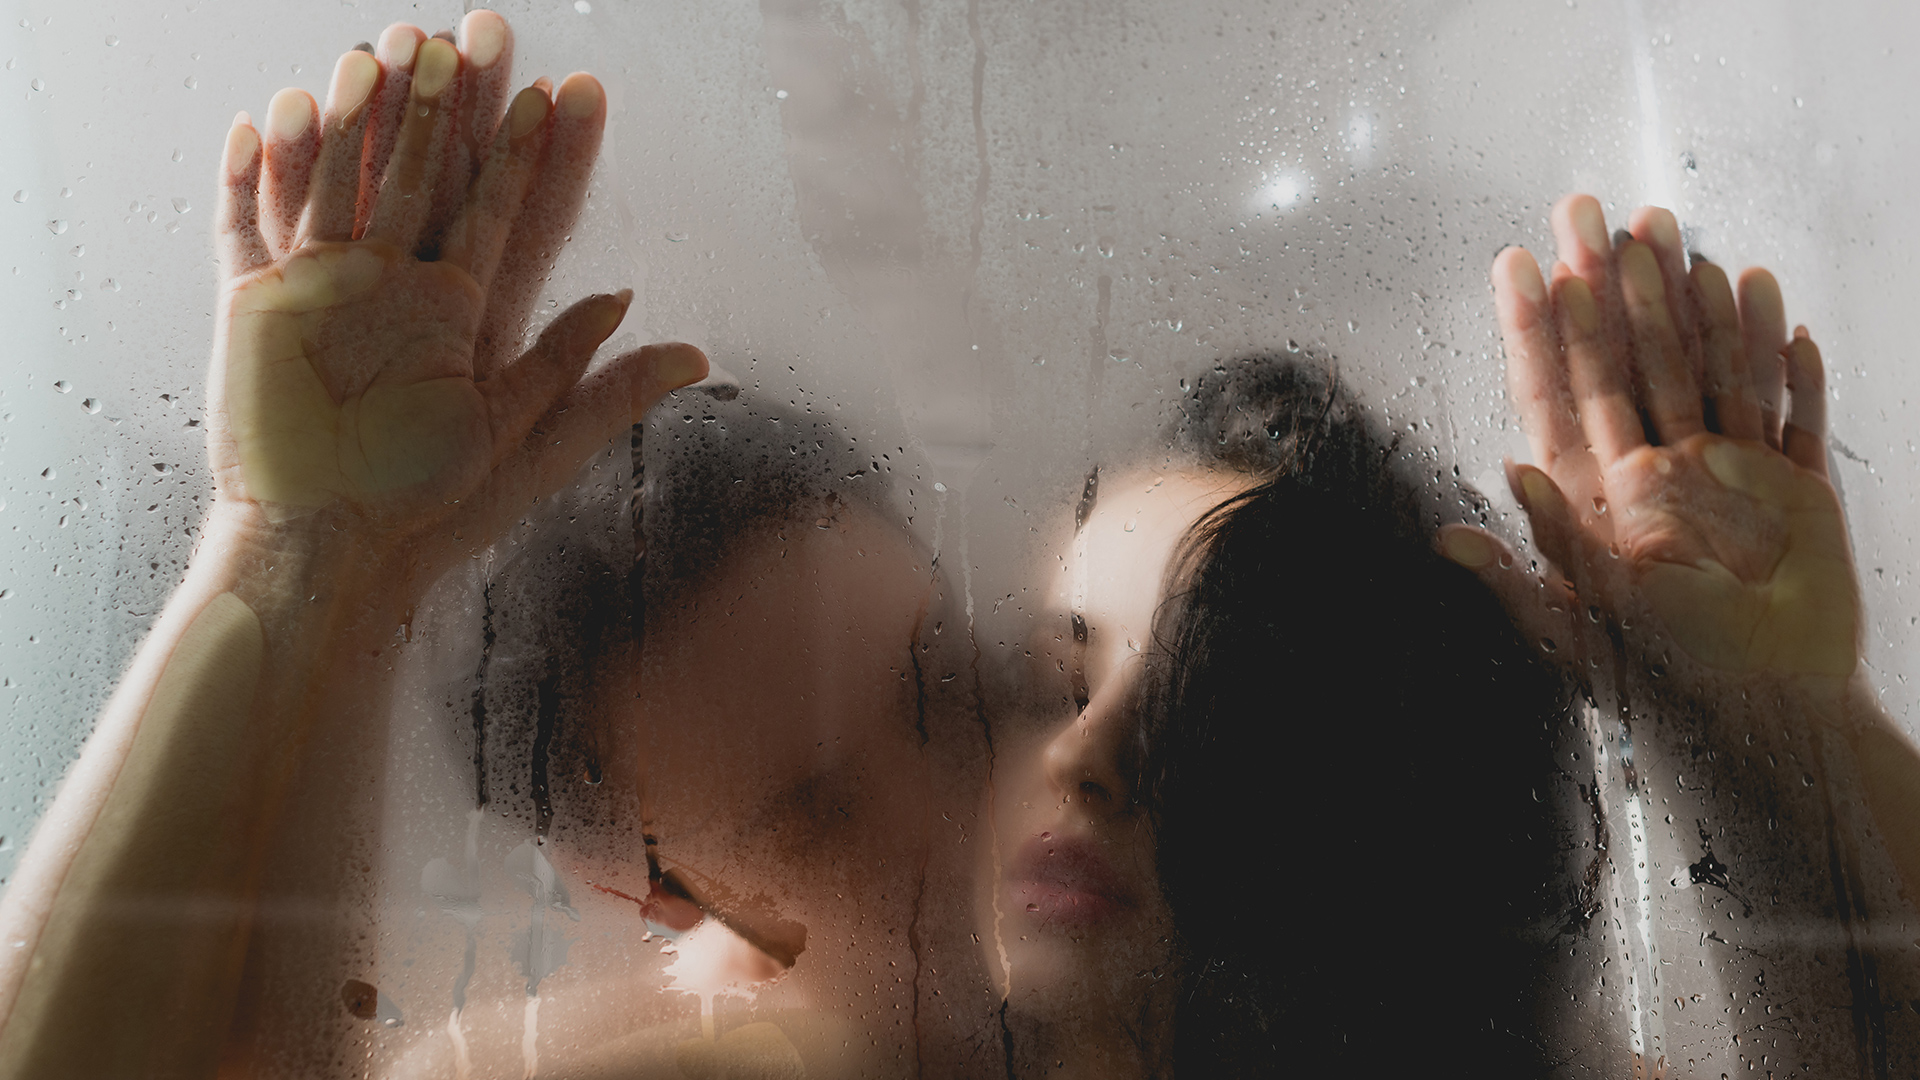 Woman being pinned against the shower glass door by a man behind her while holding her hands up and kissing her neck